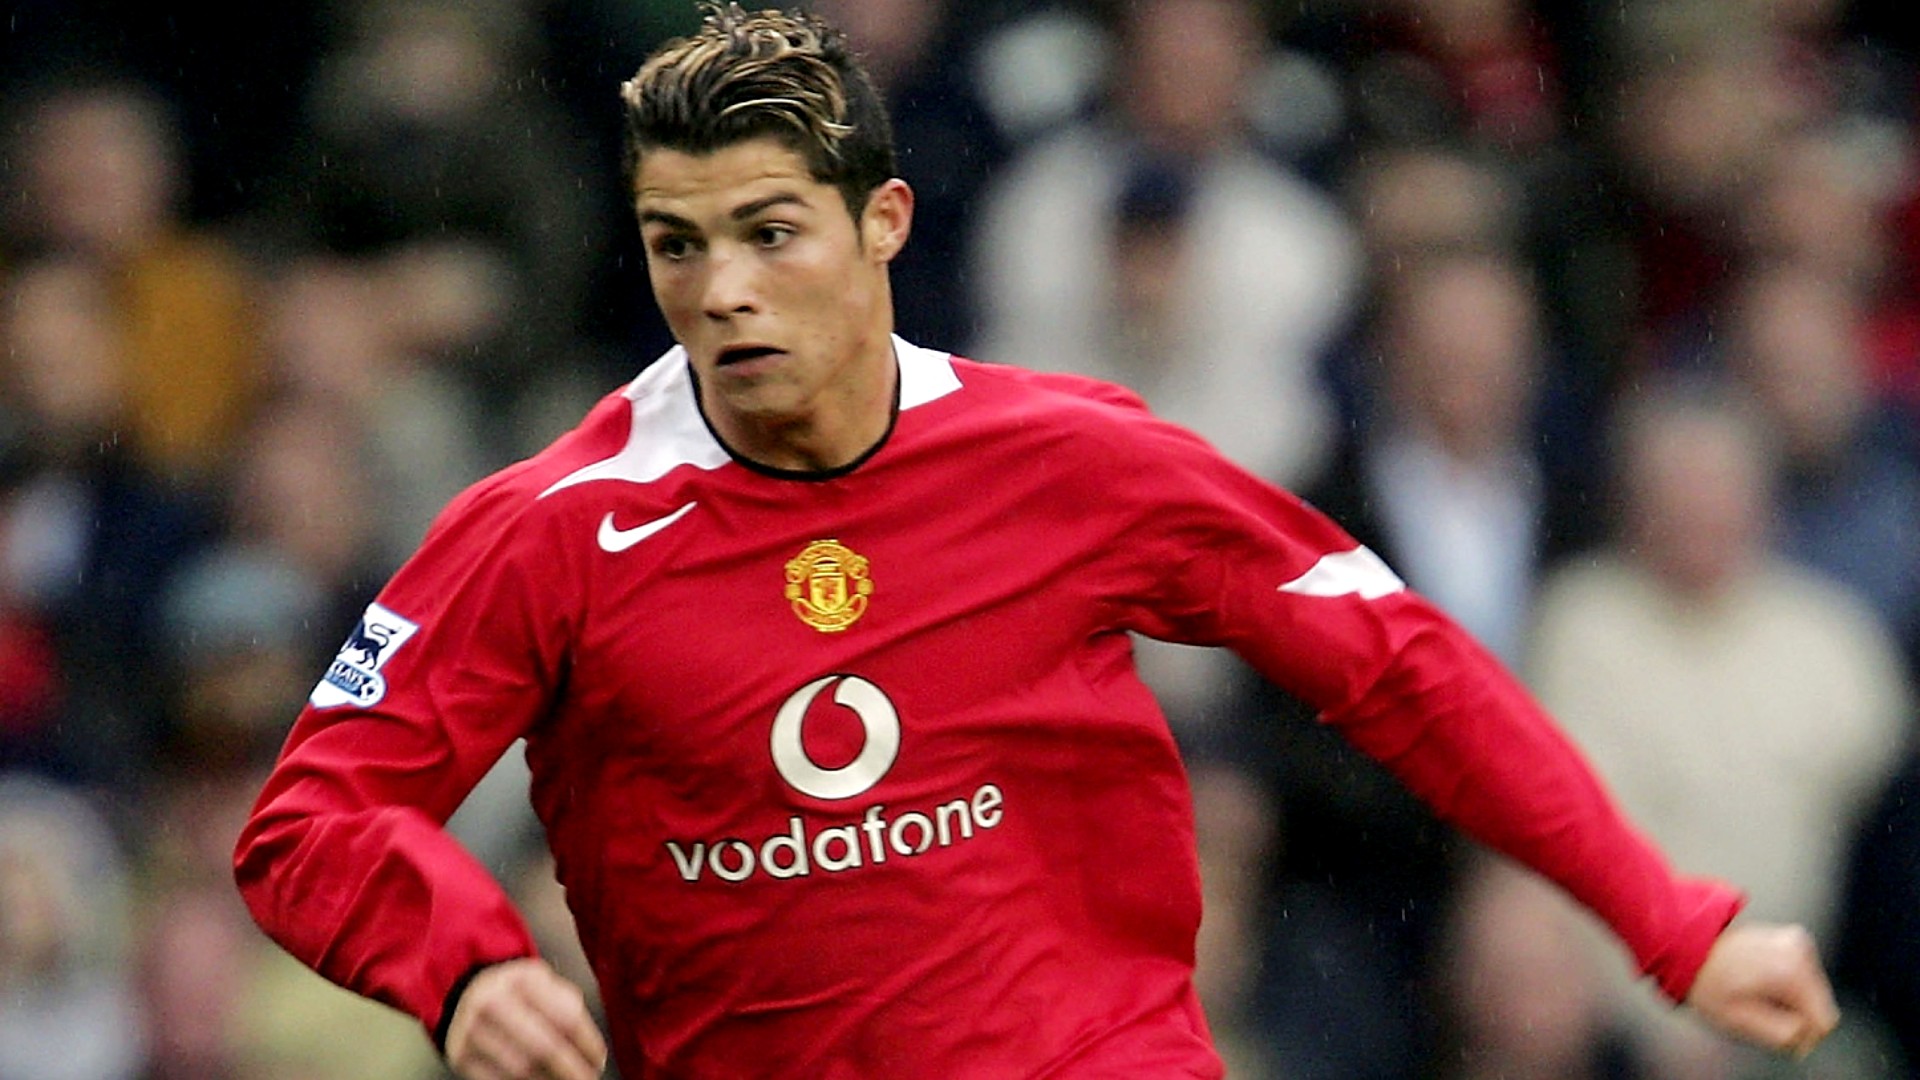 Why did Cristiano Ronaldo leave Juventus? Explaining star's transfer move to Manchester United